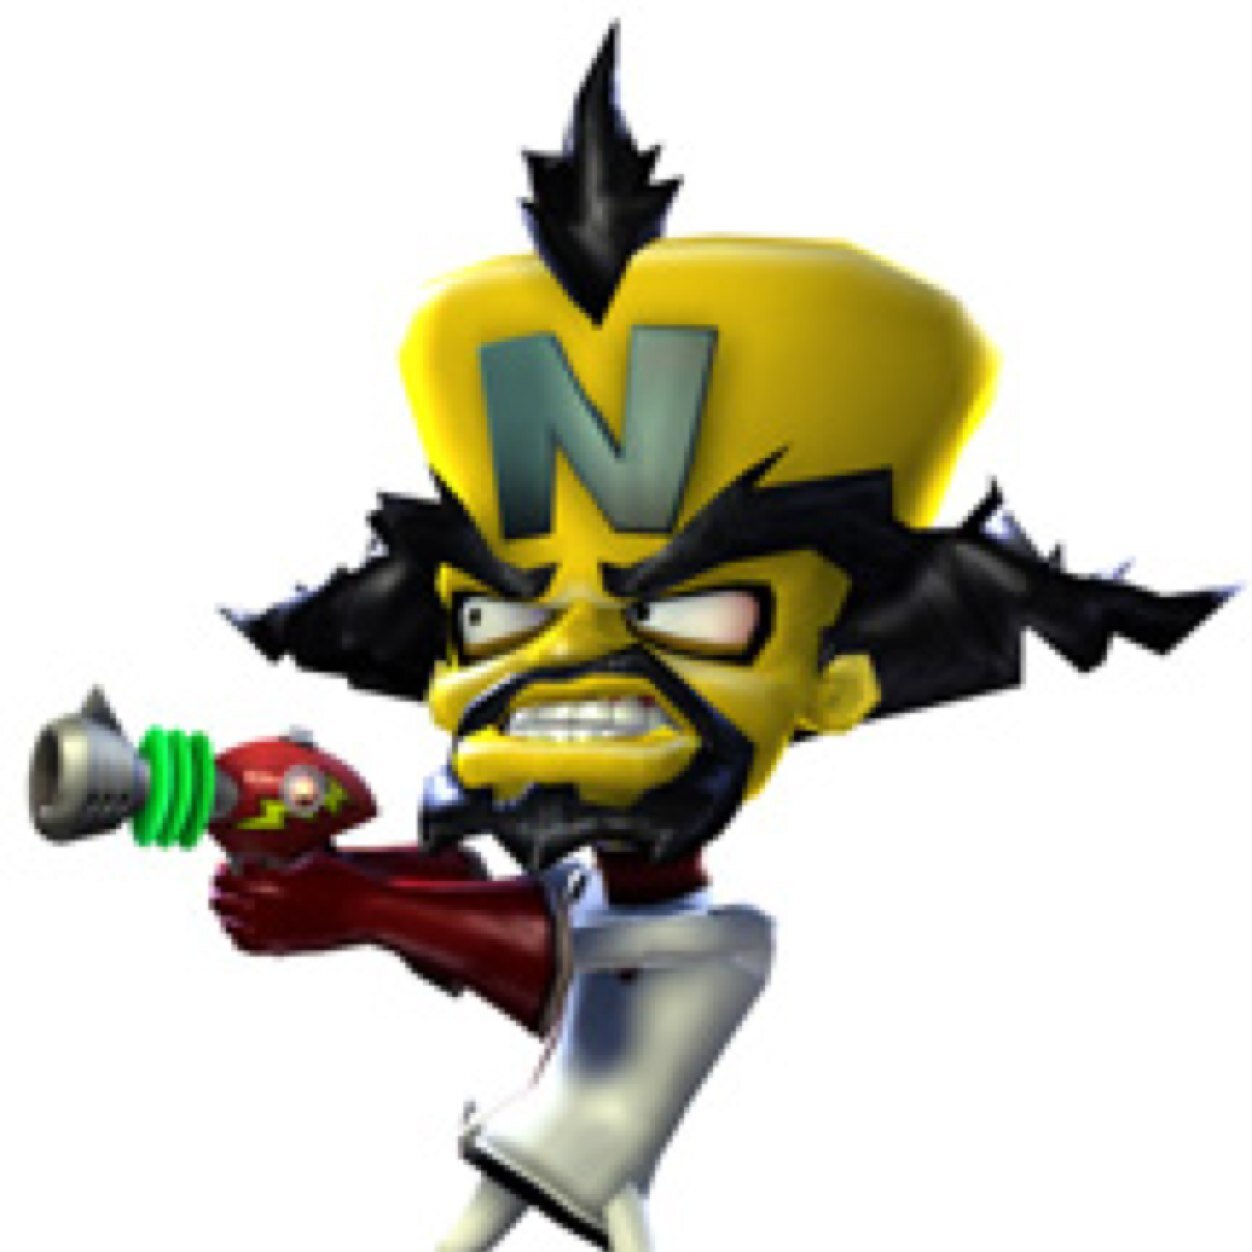 The names Cortec/Cortex. A evil scientist who shall dominate all soon enough. Just got to get rid of that bandicoot. No crystals or you'll become crystal crazy!